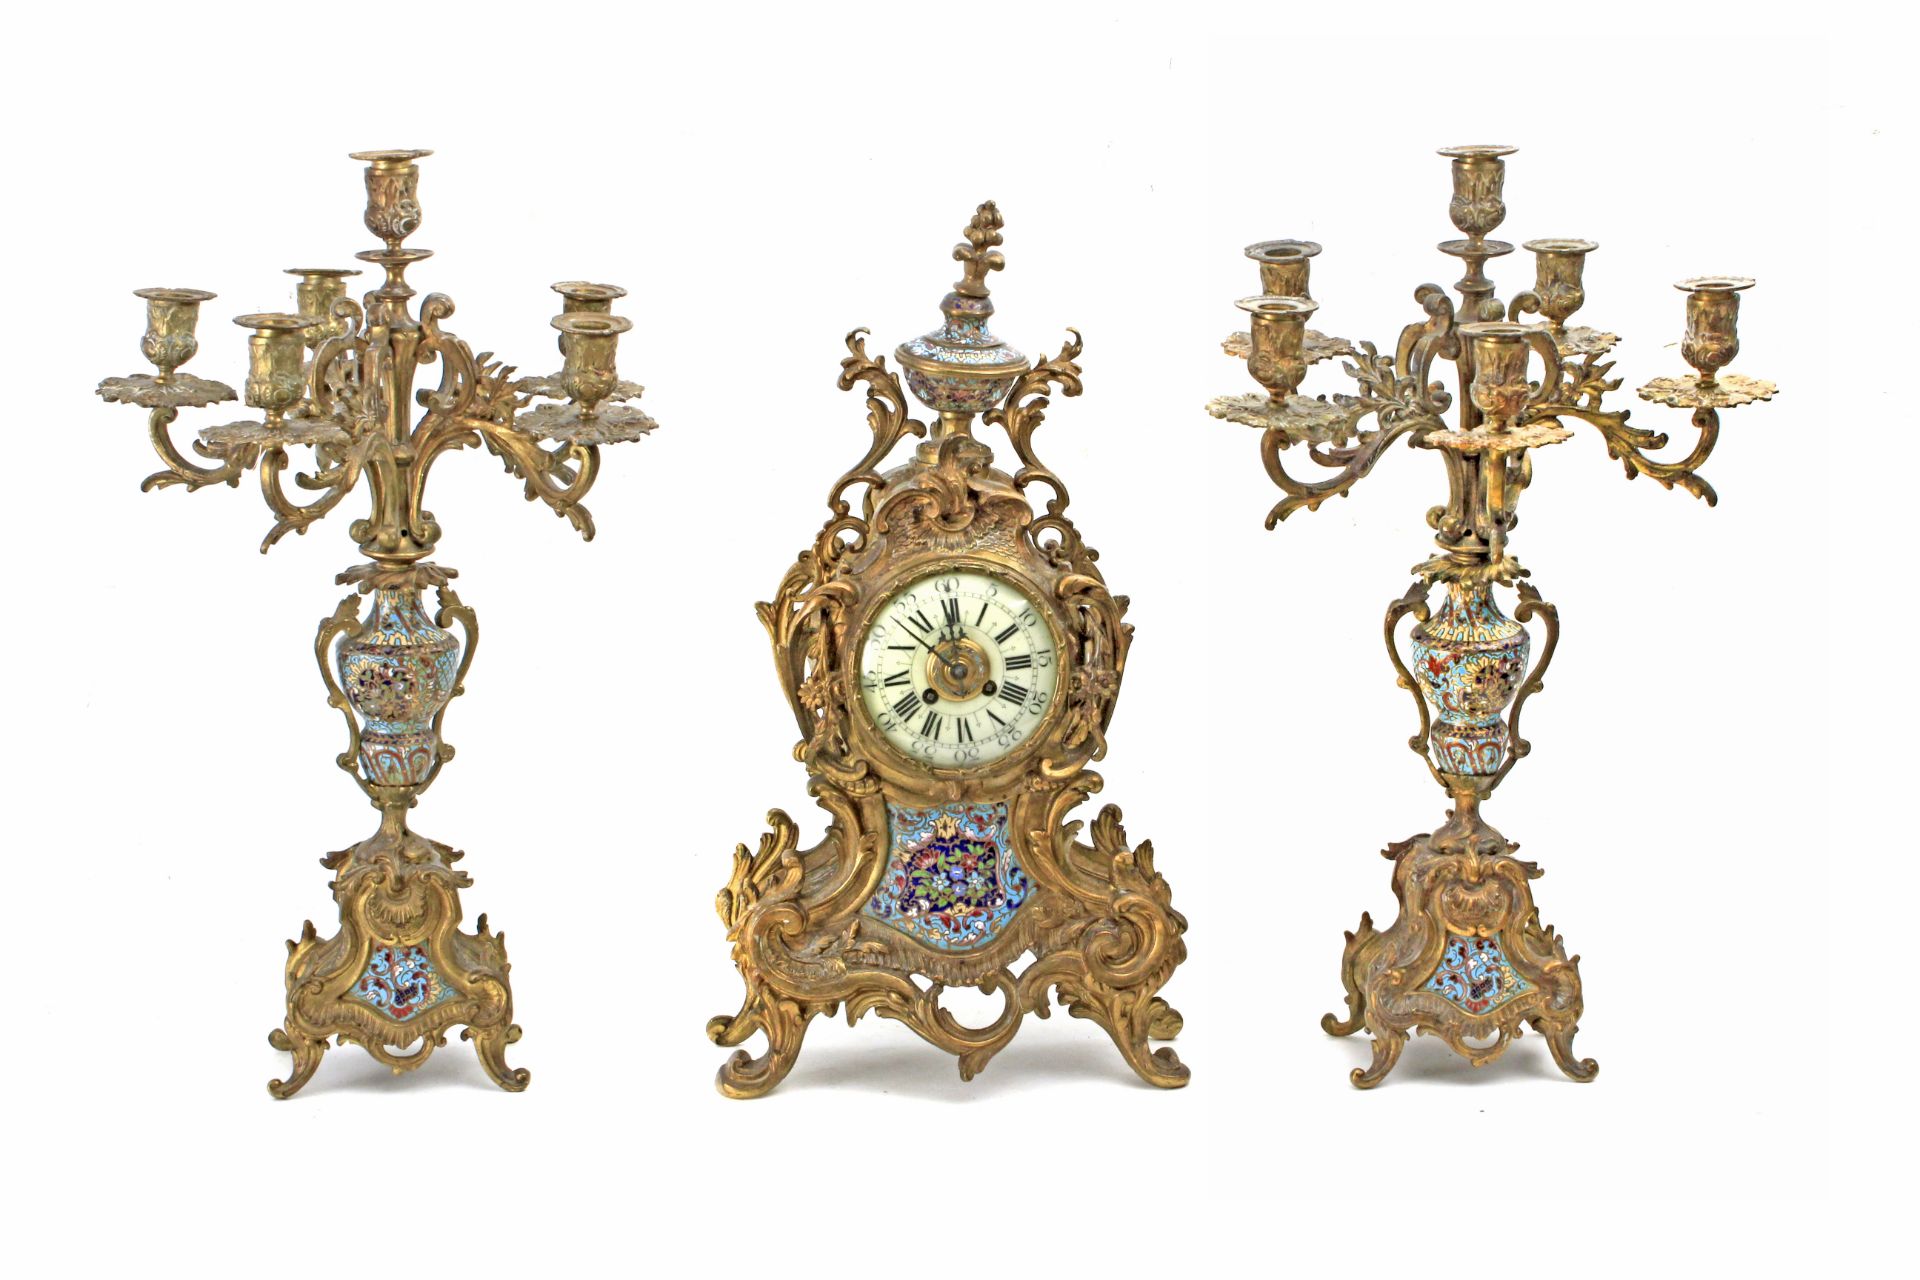 A 19th century French bronze mantel clock grnished with two candlelabras